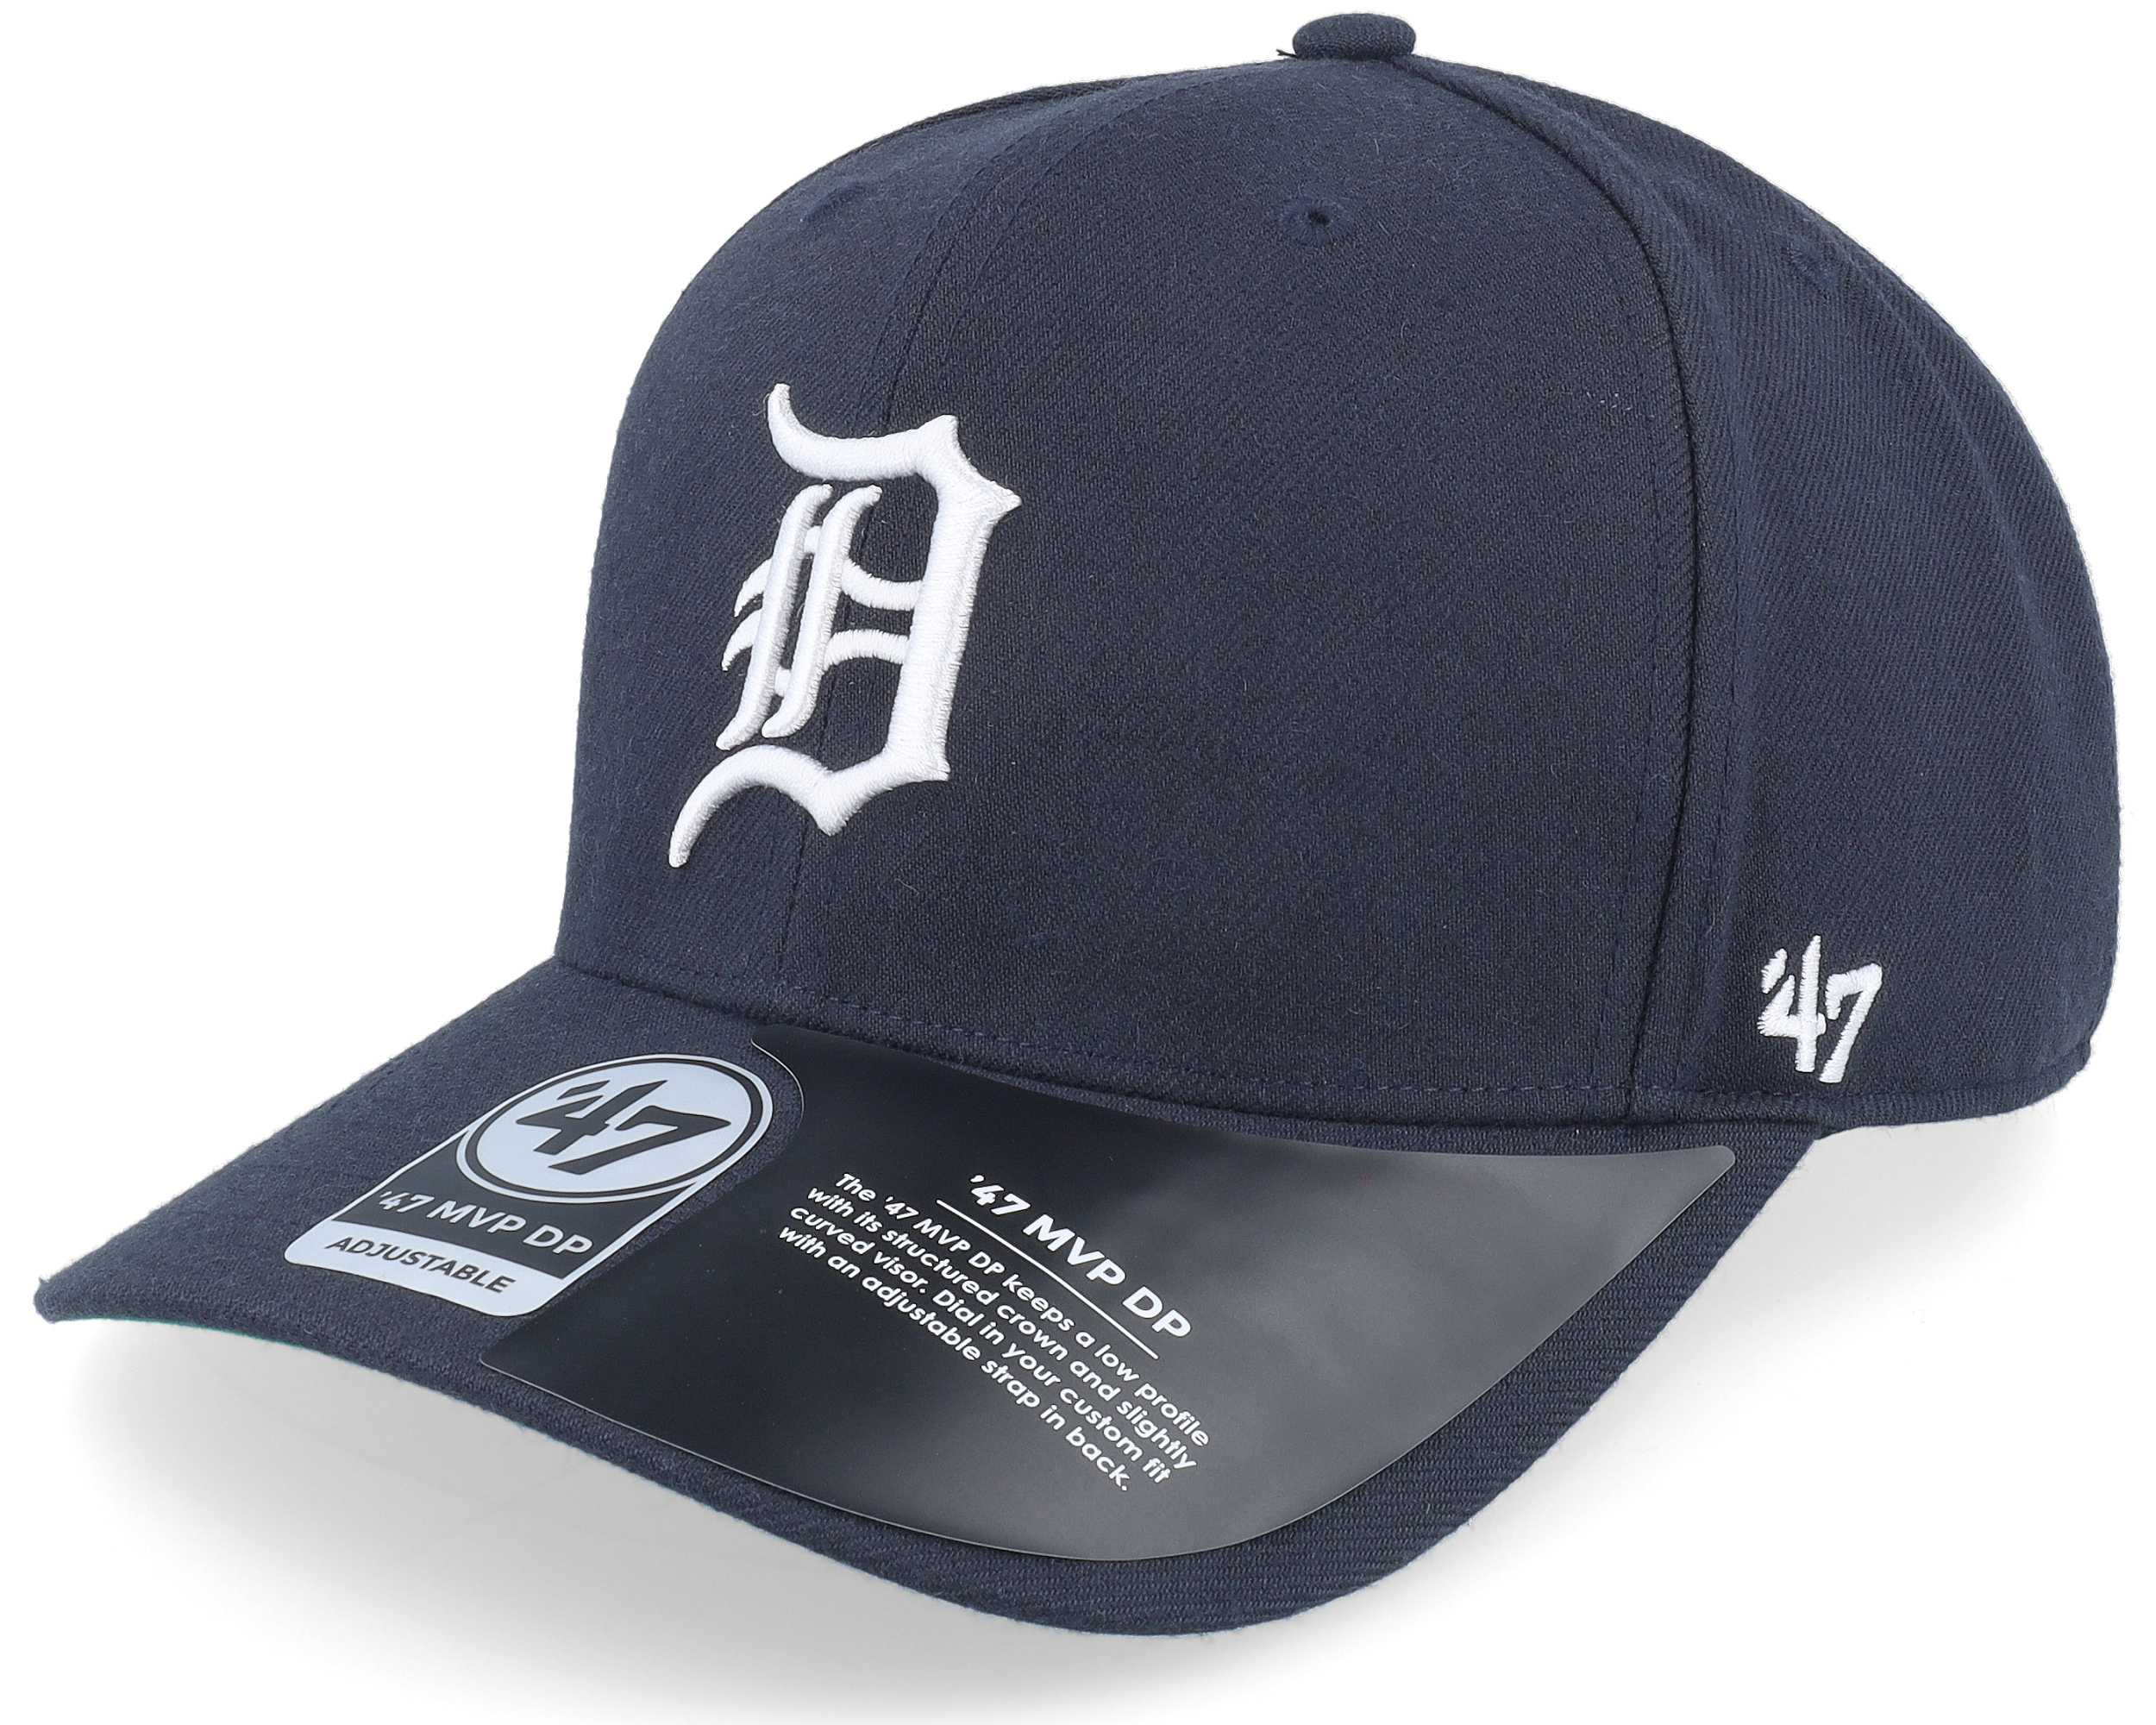 Girls Youth '47 Navy Detroit Tigers Adore Clean Up Adjustable Hat